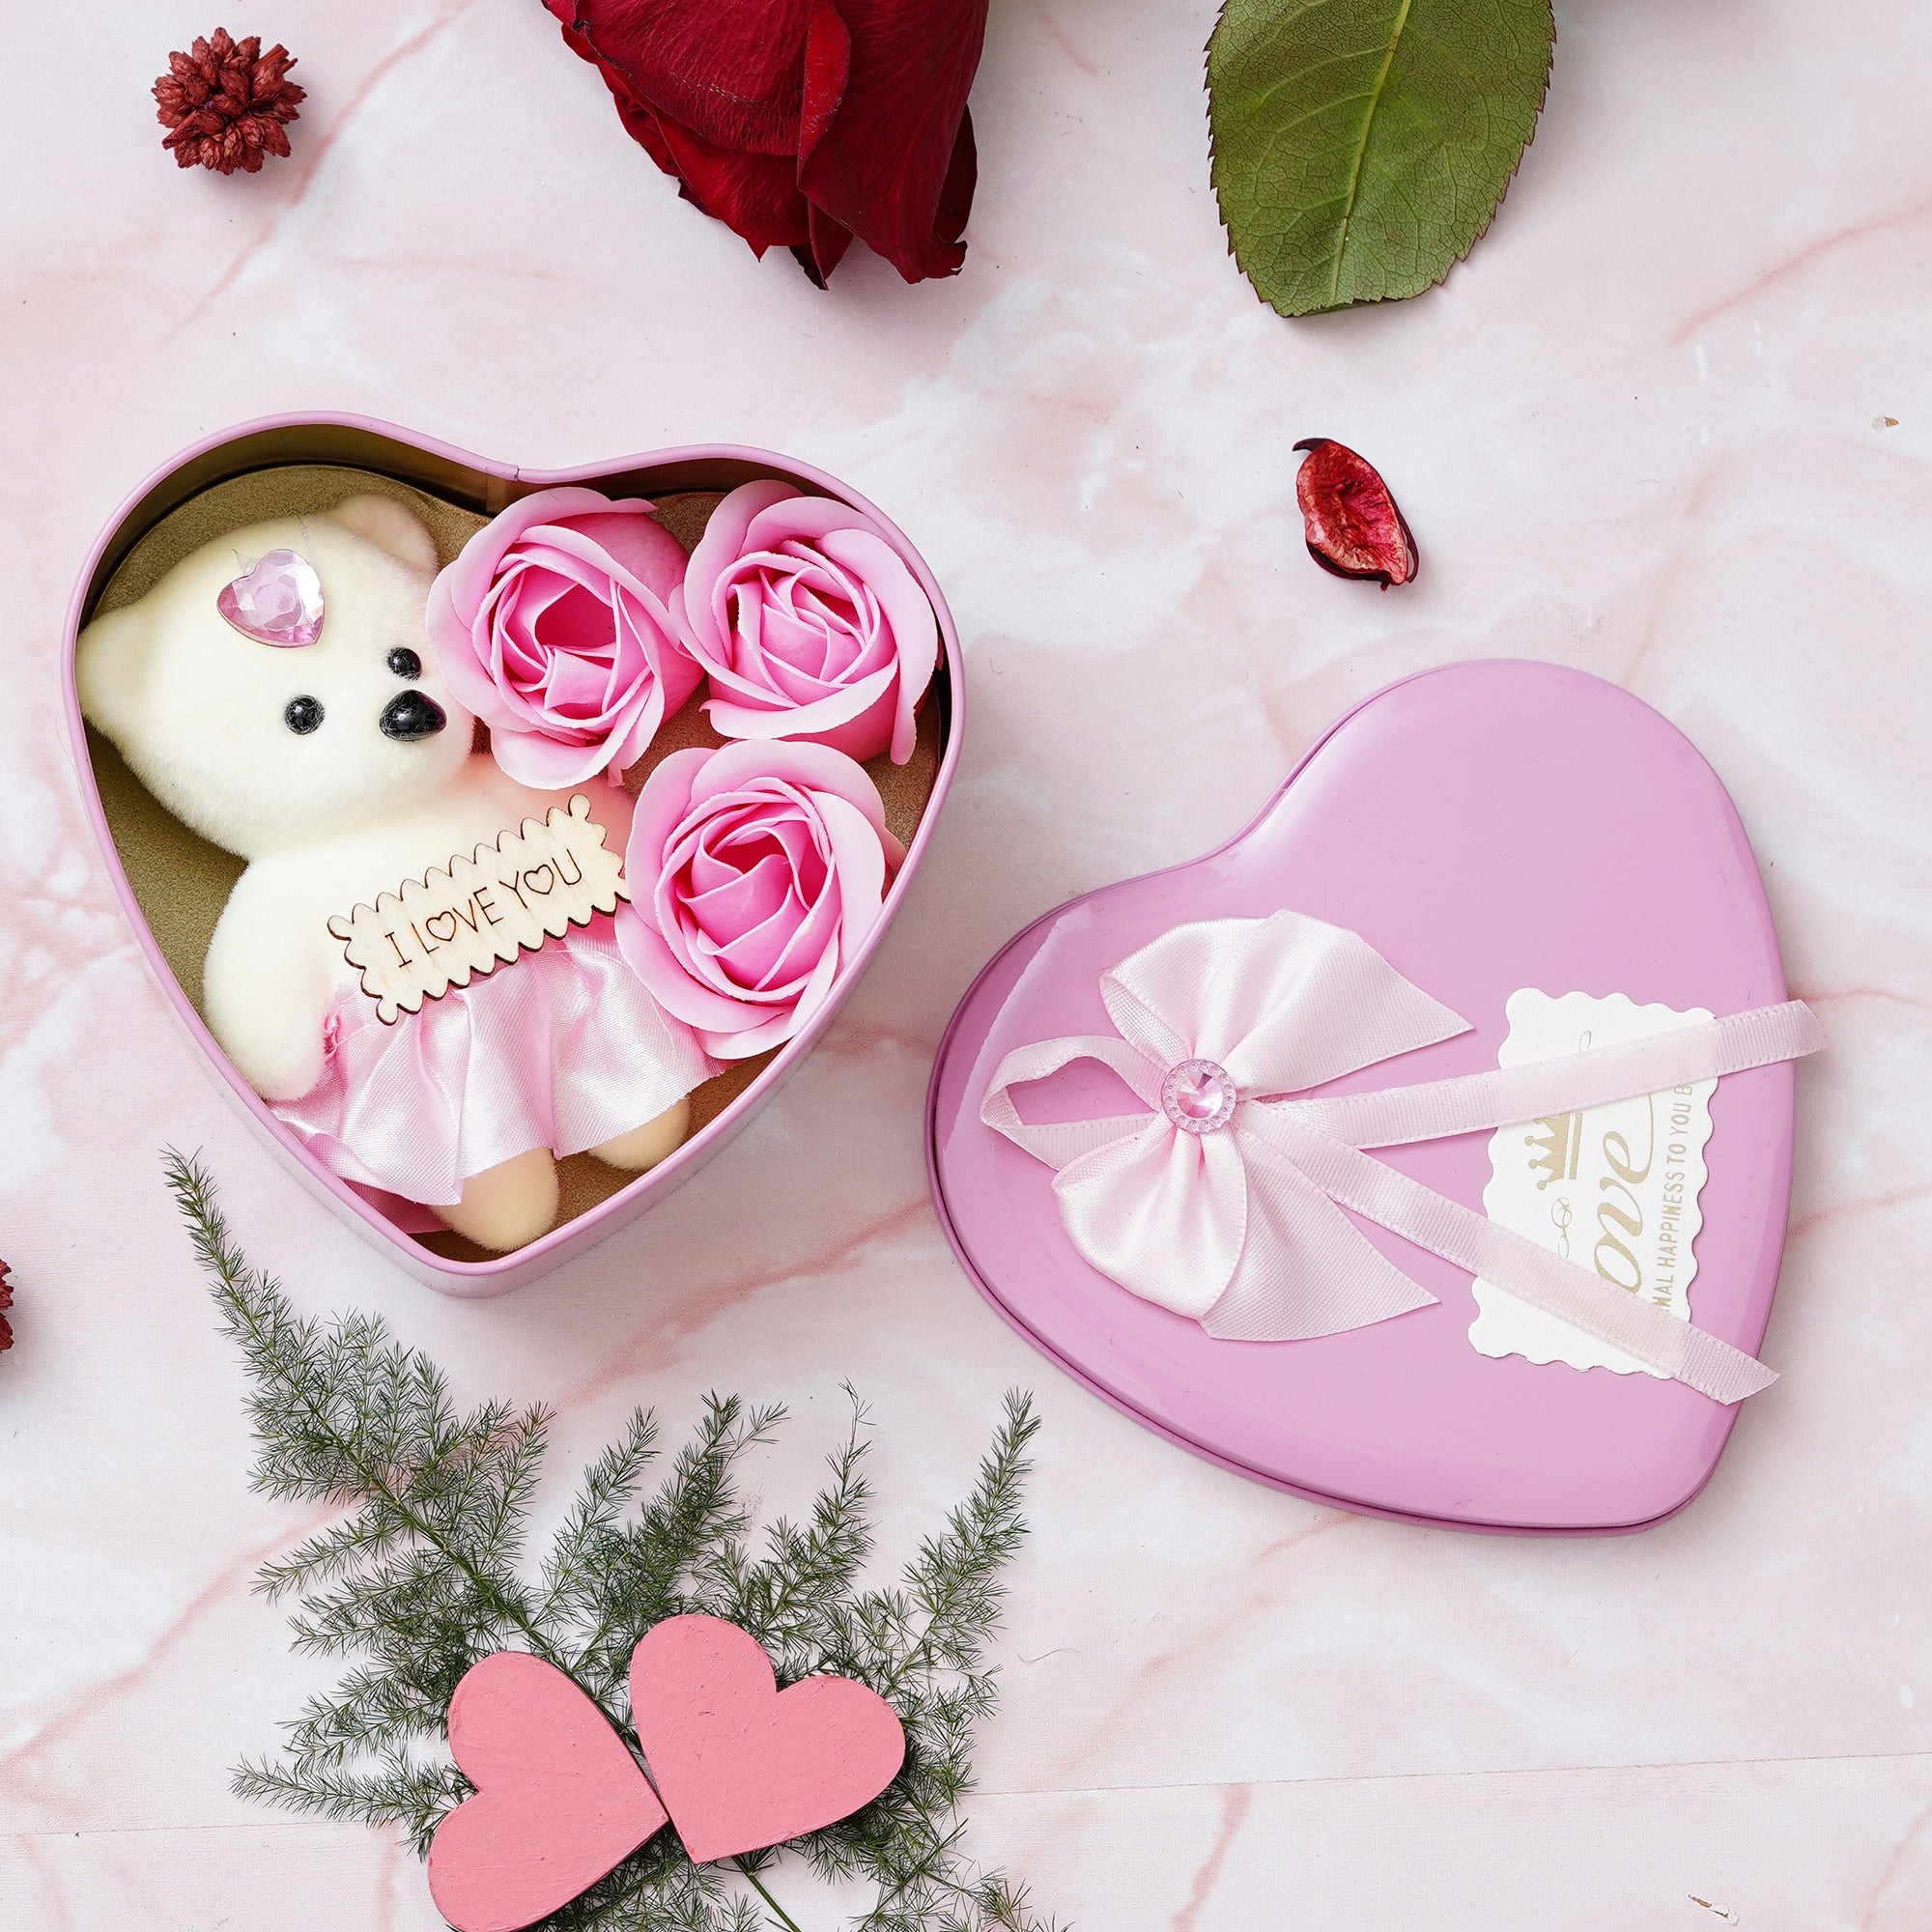 Valentine Combo of Golden Red Rose Gift Set, "My Heart Beats Only For You" Wooden Showpiece With Stand, Pink Heart Shaped Gift Box with Teddy and Roses 5